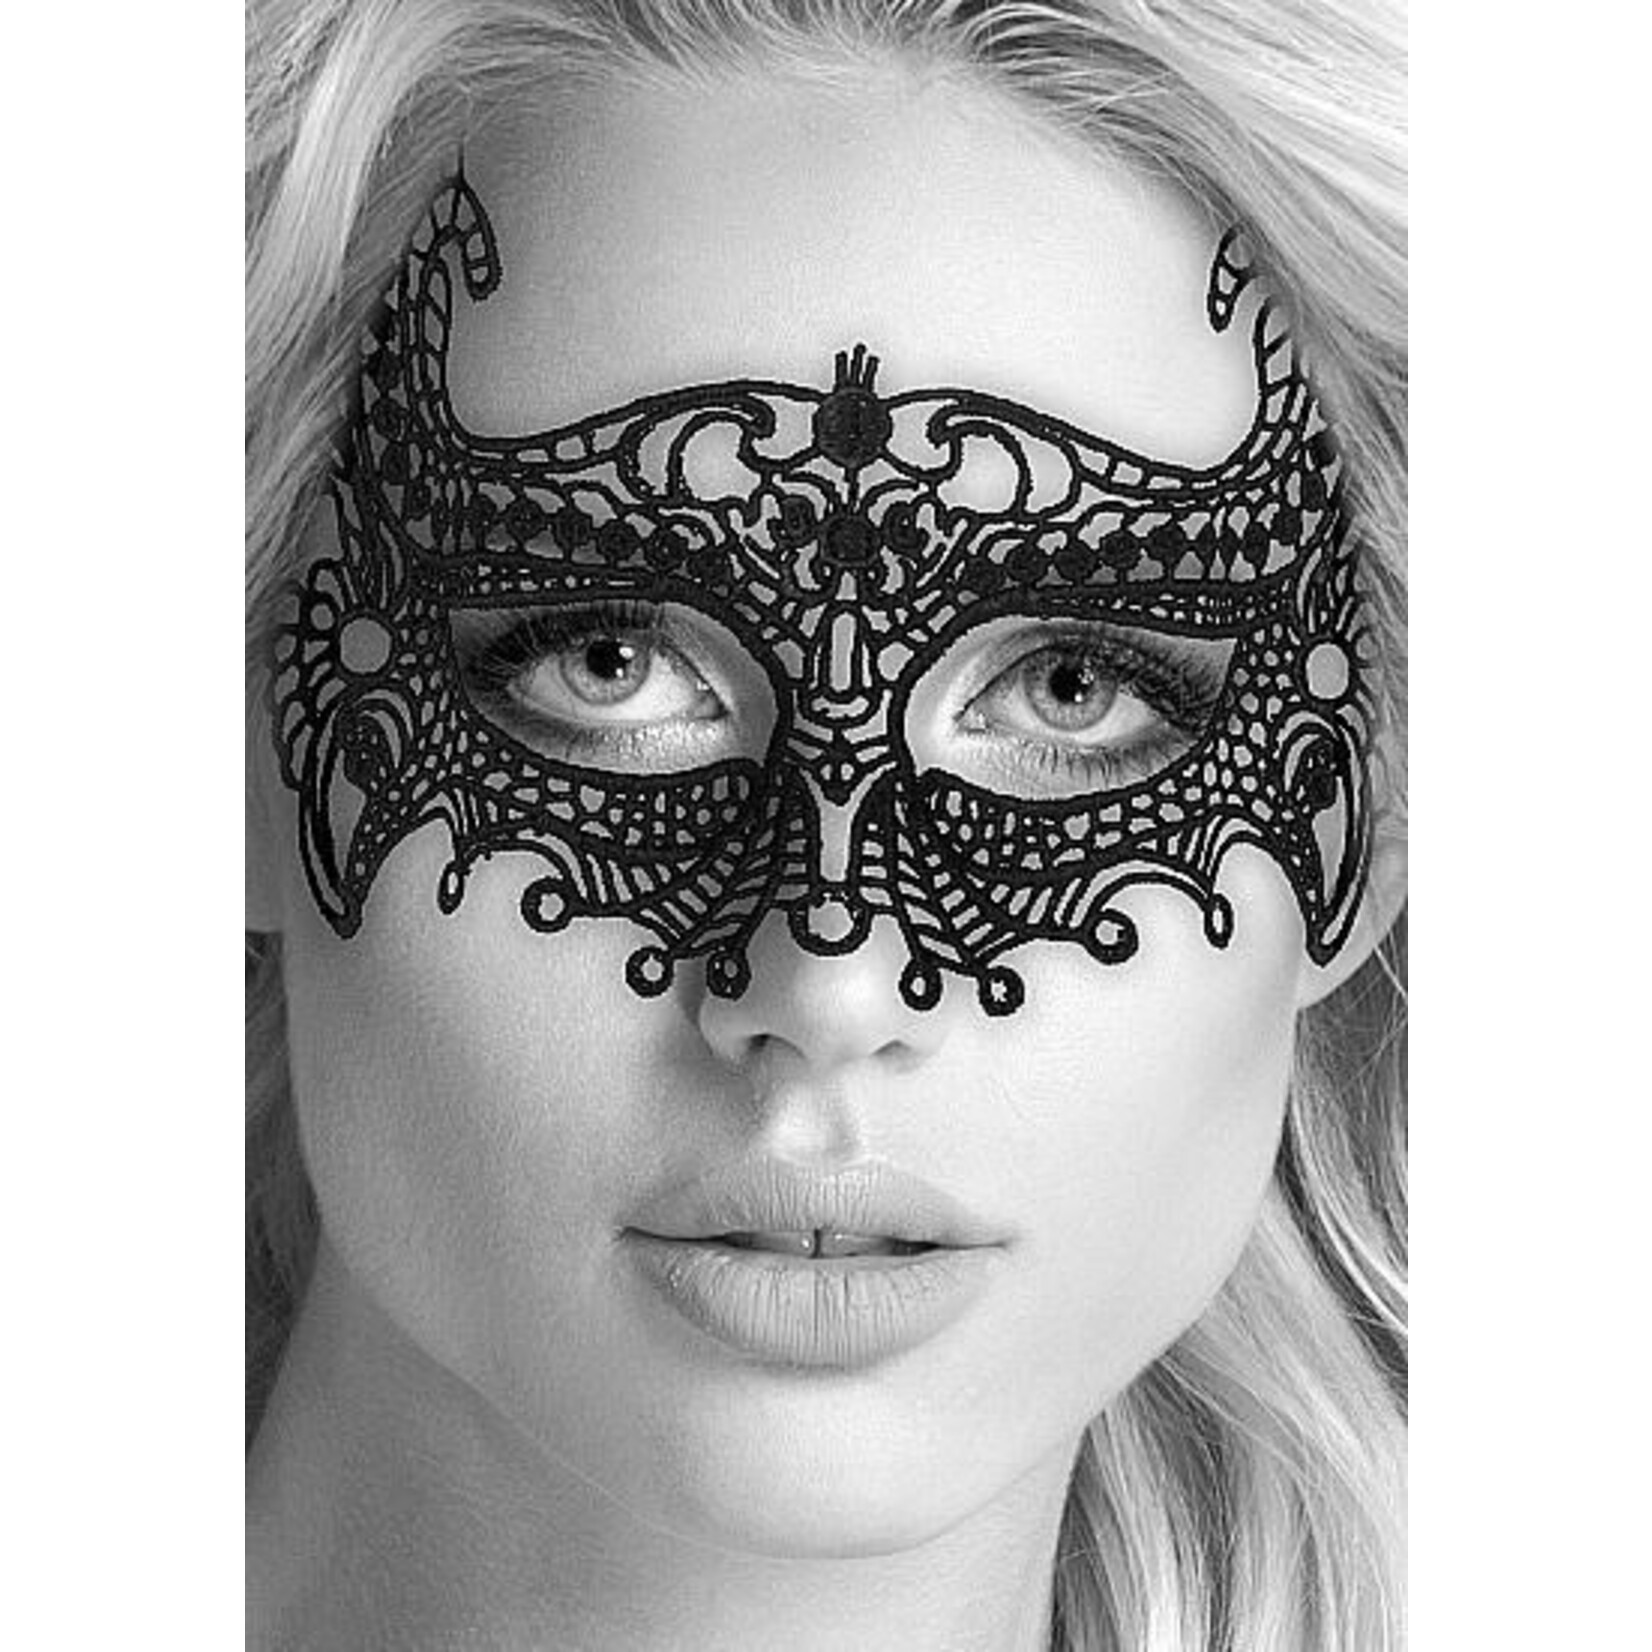 OUCH OUCH! BLACK & WHITE LACE EMPRESS EYE-MASK